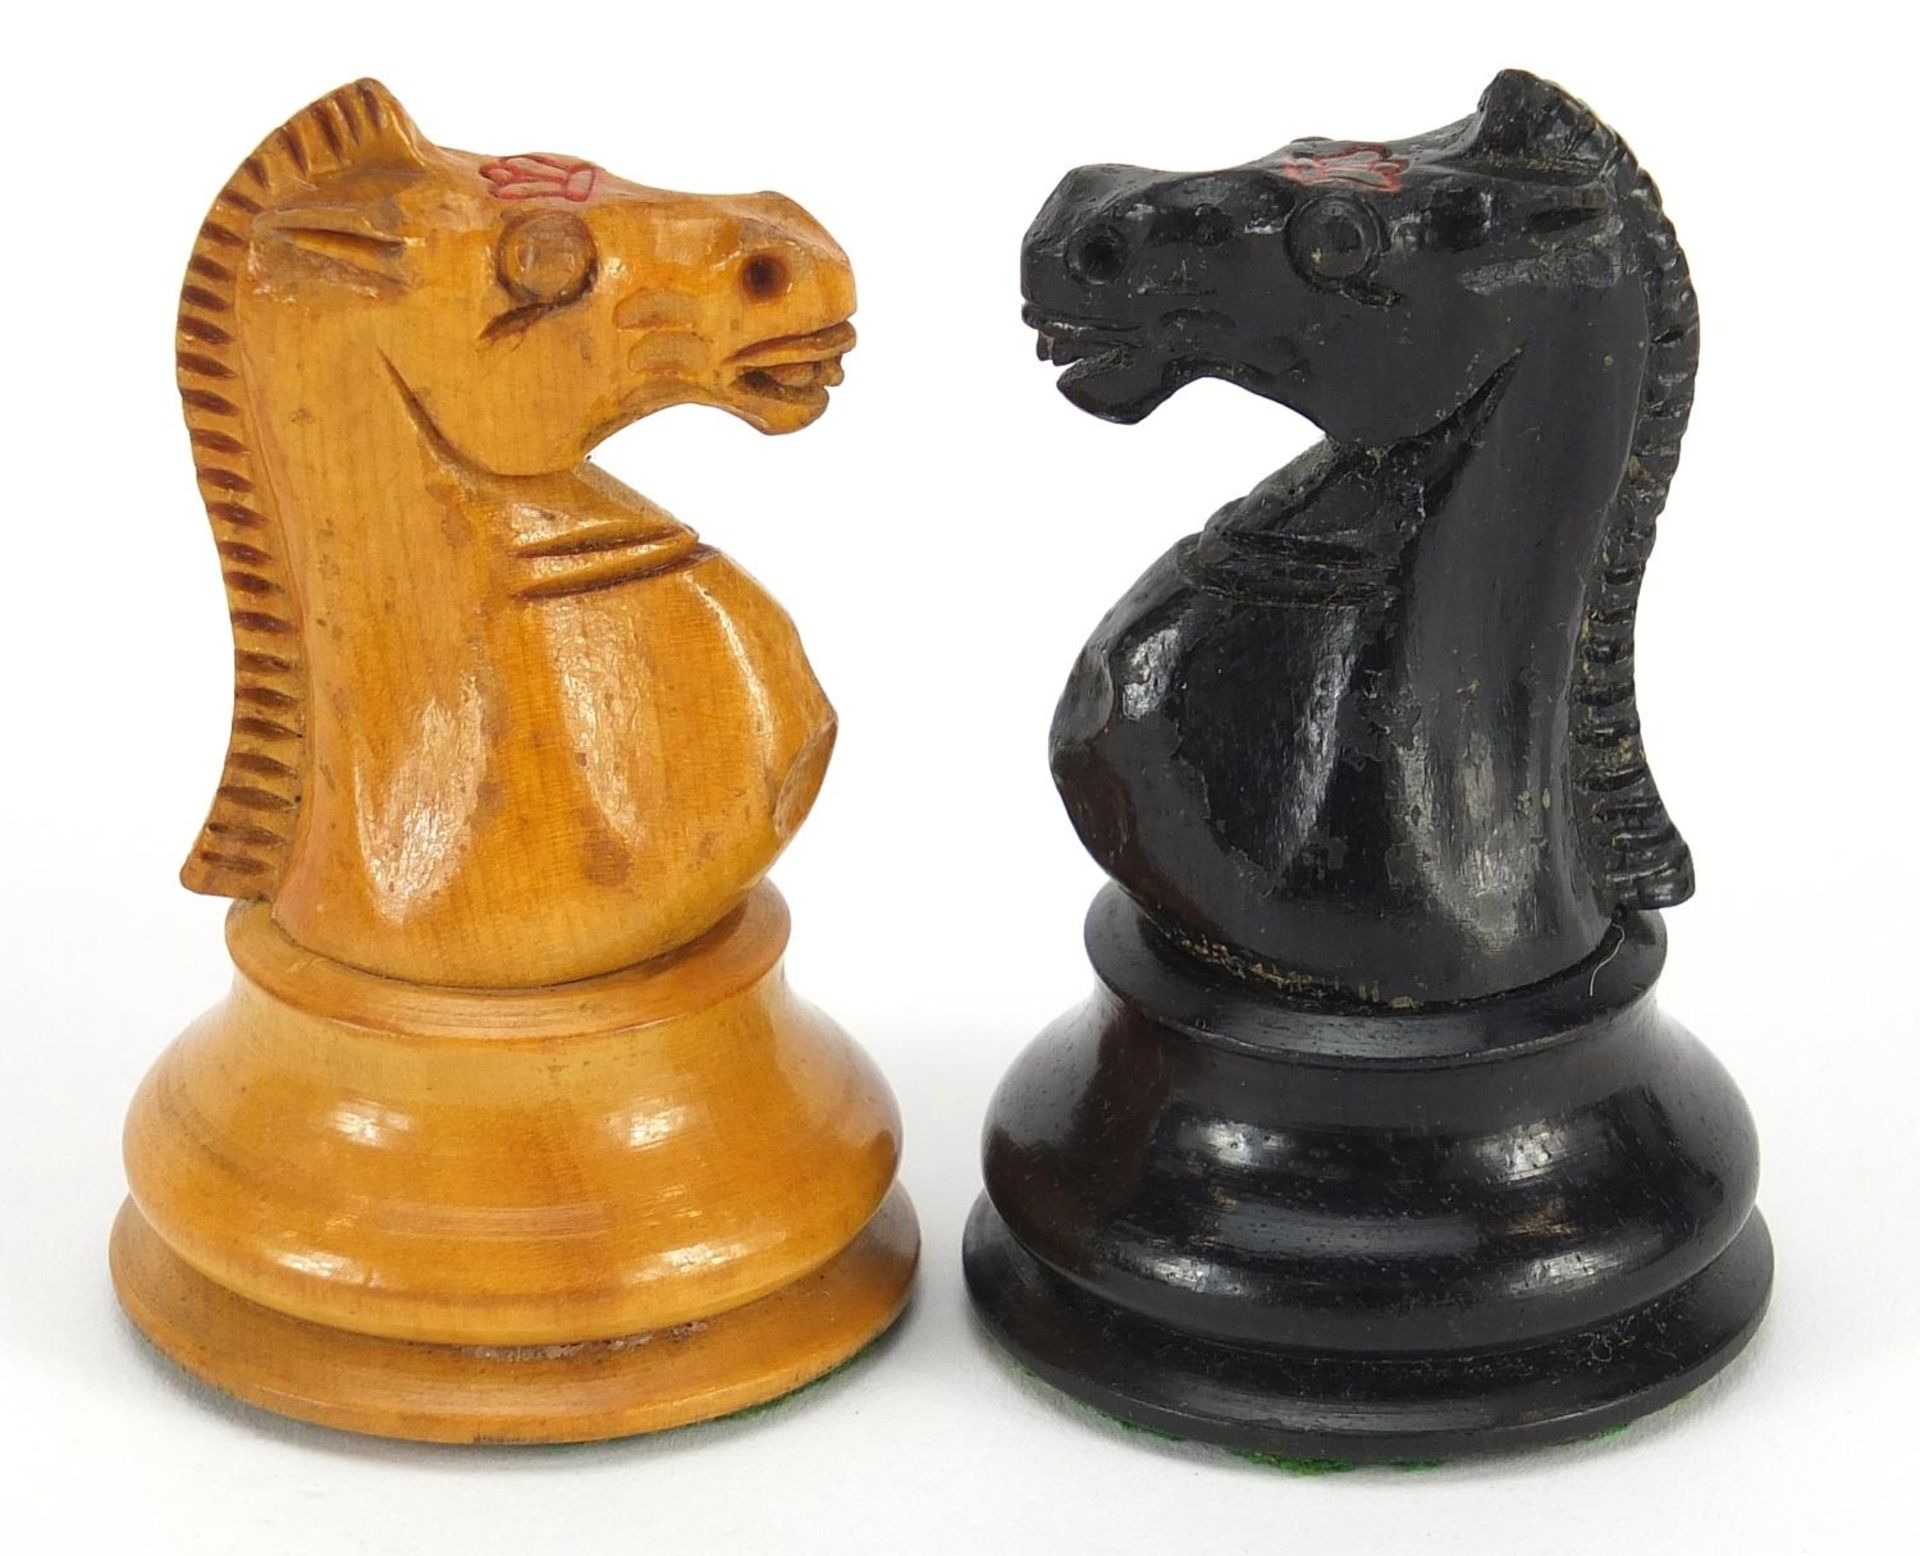 Boxwood and ebony Staunton chess set with mahogany case, possibly by Jaques, the largest piece 8.5cm - Image 5 of 8